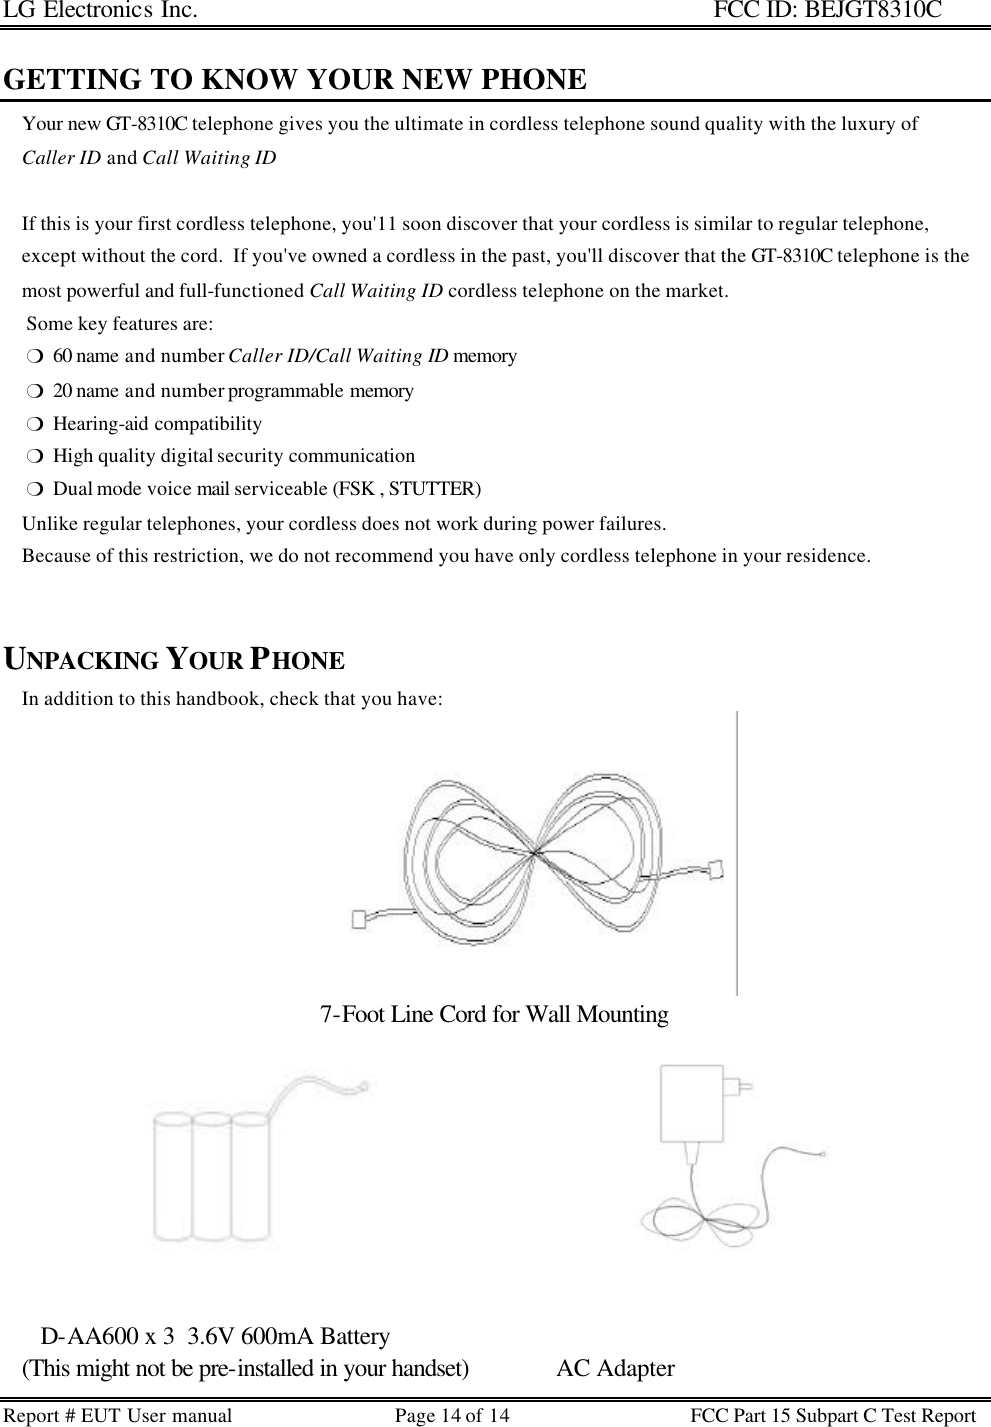 LG Electronics Inc.                                                                                                   FCC ID: BEJGT8310C Report # EUT User manual Page 14 of 14 FCC Part 15 Subpart C Test Report   GETTING TO KNOW YOUR NEW PHONE     Your new GT-8310C telephone gives you the ultimate in cordless telephone sound quality with the luxury of      Caller ID and Call Waiting ID        If this is your first cordless telephone, you&apos;11 soon discover that your cordless is similar to regular telephone,      except without the cord.  If you&apos;ve owned a cordless in the past, you&apos;ll discover that the GT-8310C telephone is the     most powerful and full-functioned Call Waiting ID cordless telephone on the market.      Some key features are:      m  60 name and number Caller ID/Call Waiting ID memory       m  20 name and number programmable memory      m  Hearing-aid compatibility      m  High quality digital security communication      m  Dual mode voice mail serviceable (FSK , STUTTER)     Unlike regular telephones, your cordless does not work during power failures.       Because of this restriction, we do not recommend you have only cordless telephone in your residence.       UNPACKING YOUR PHONE     In addition to this handbook, check that you have: 7-Foot Line Cord for Wall Mounting         D-AA600 x 3  3.6V 600mA Battery    (This might not be pre-installed in your handset)              AC Adapter 